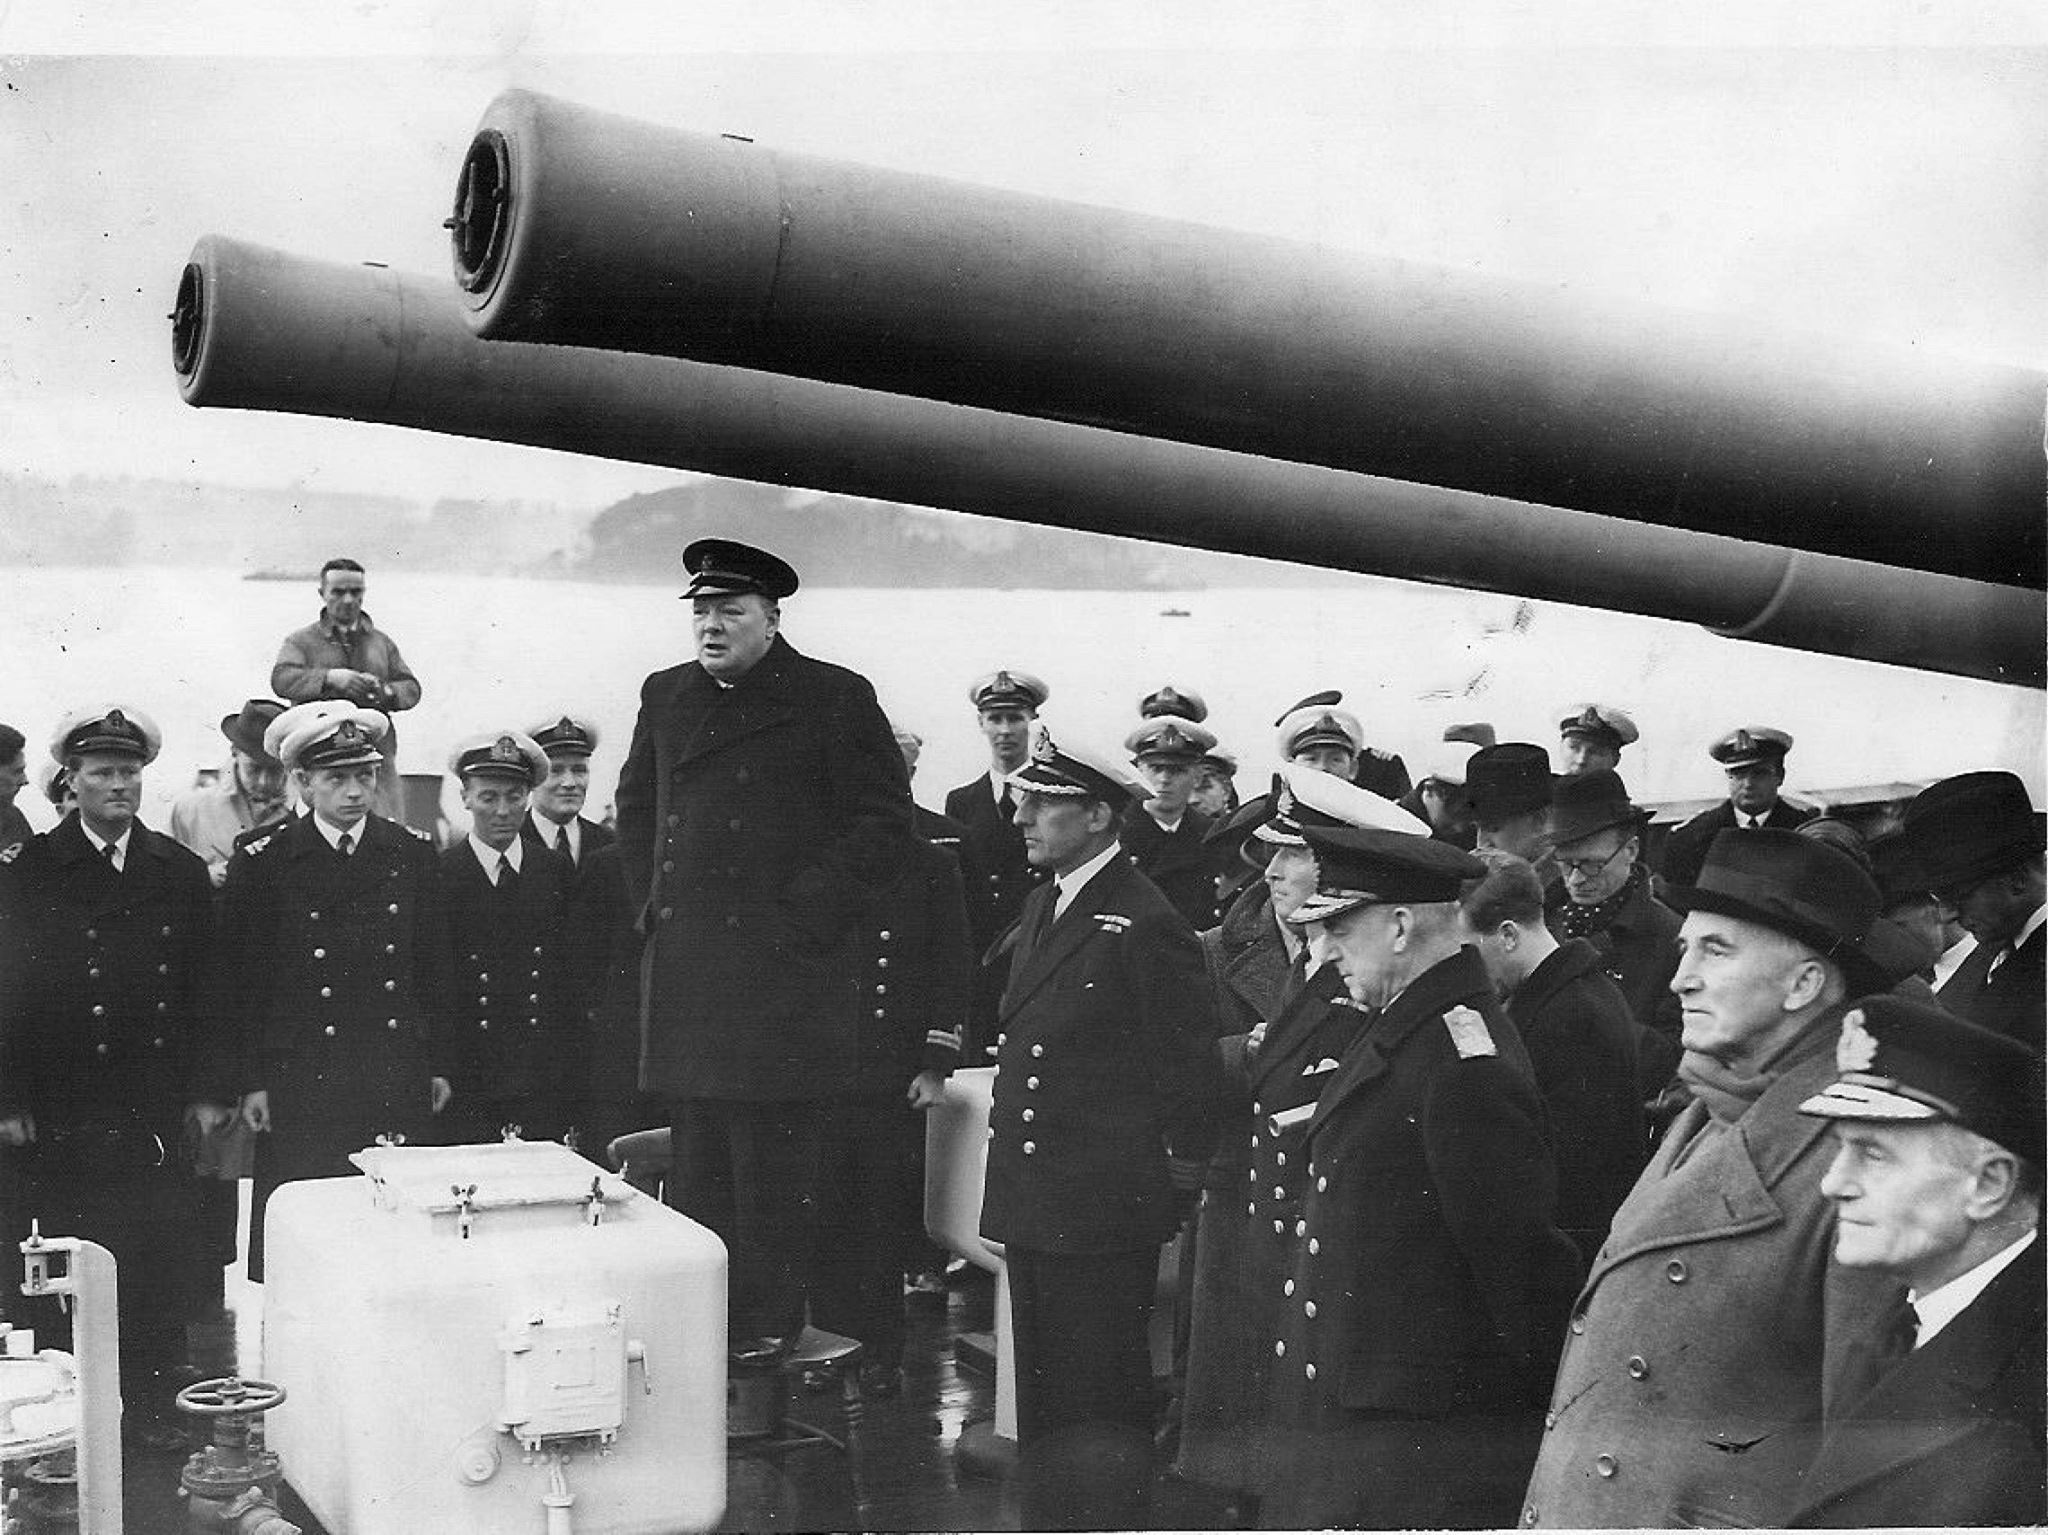 Churchill speaking to the crew of HMS Exeter